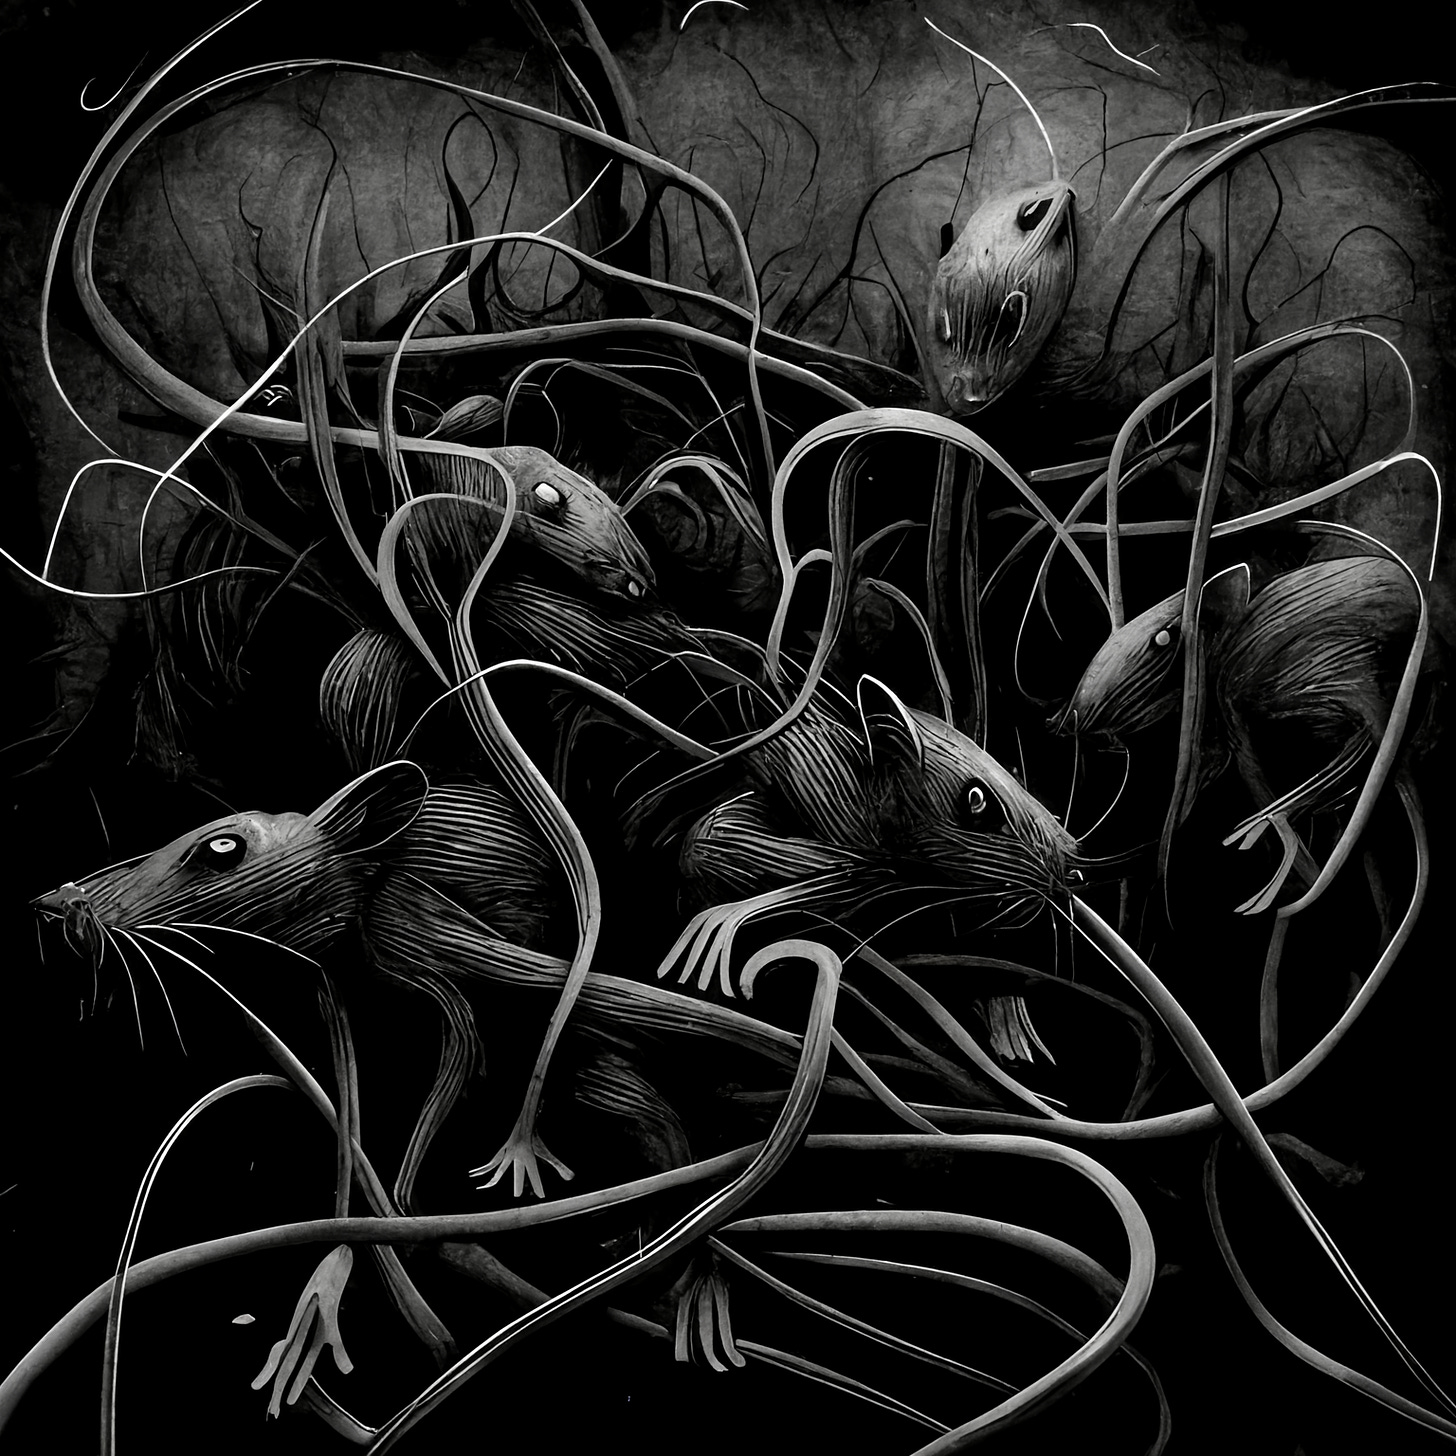 A mass of rats with tangled tails. Charcoal horror illustration.